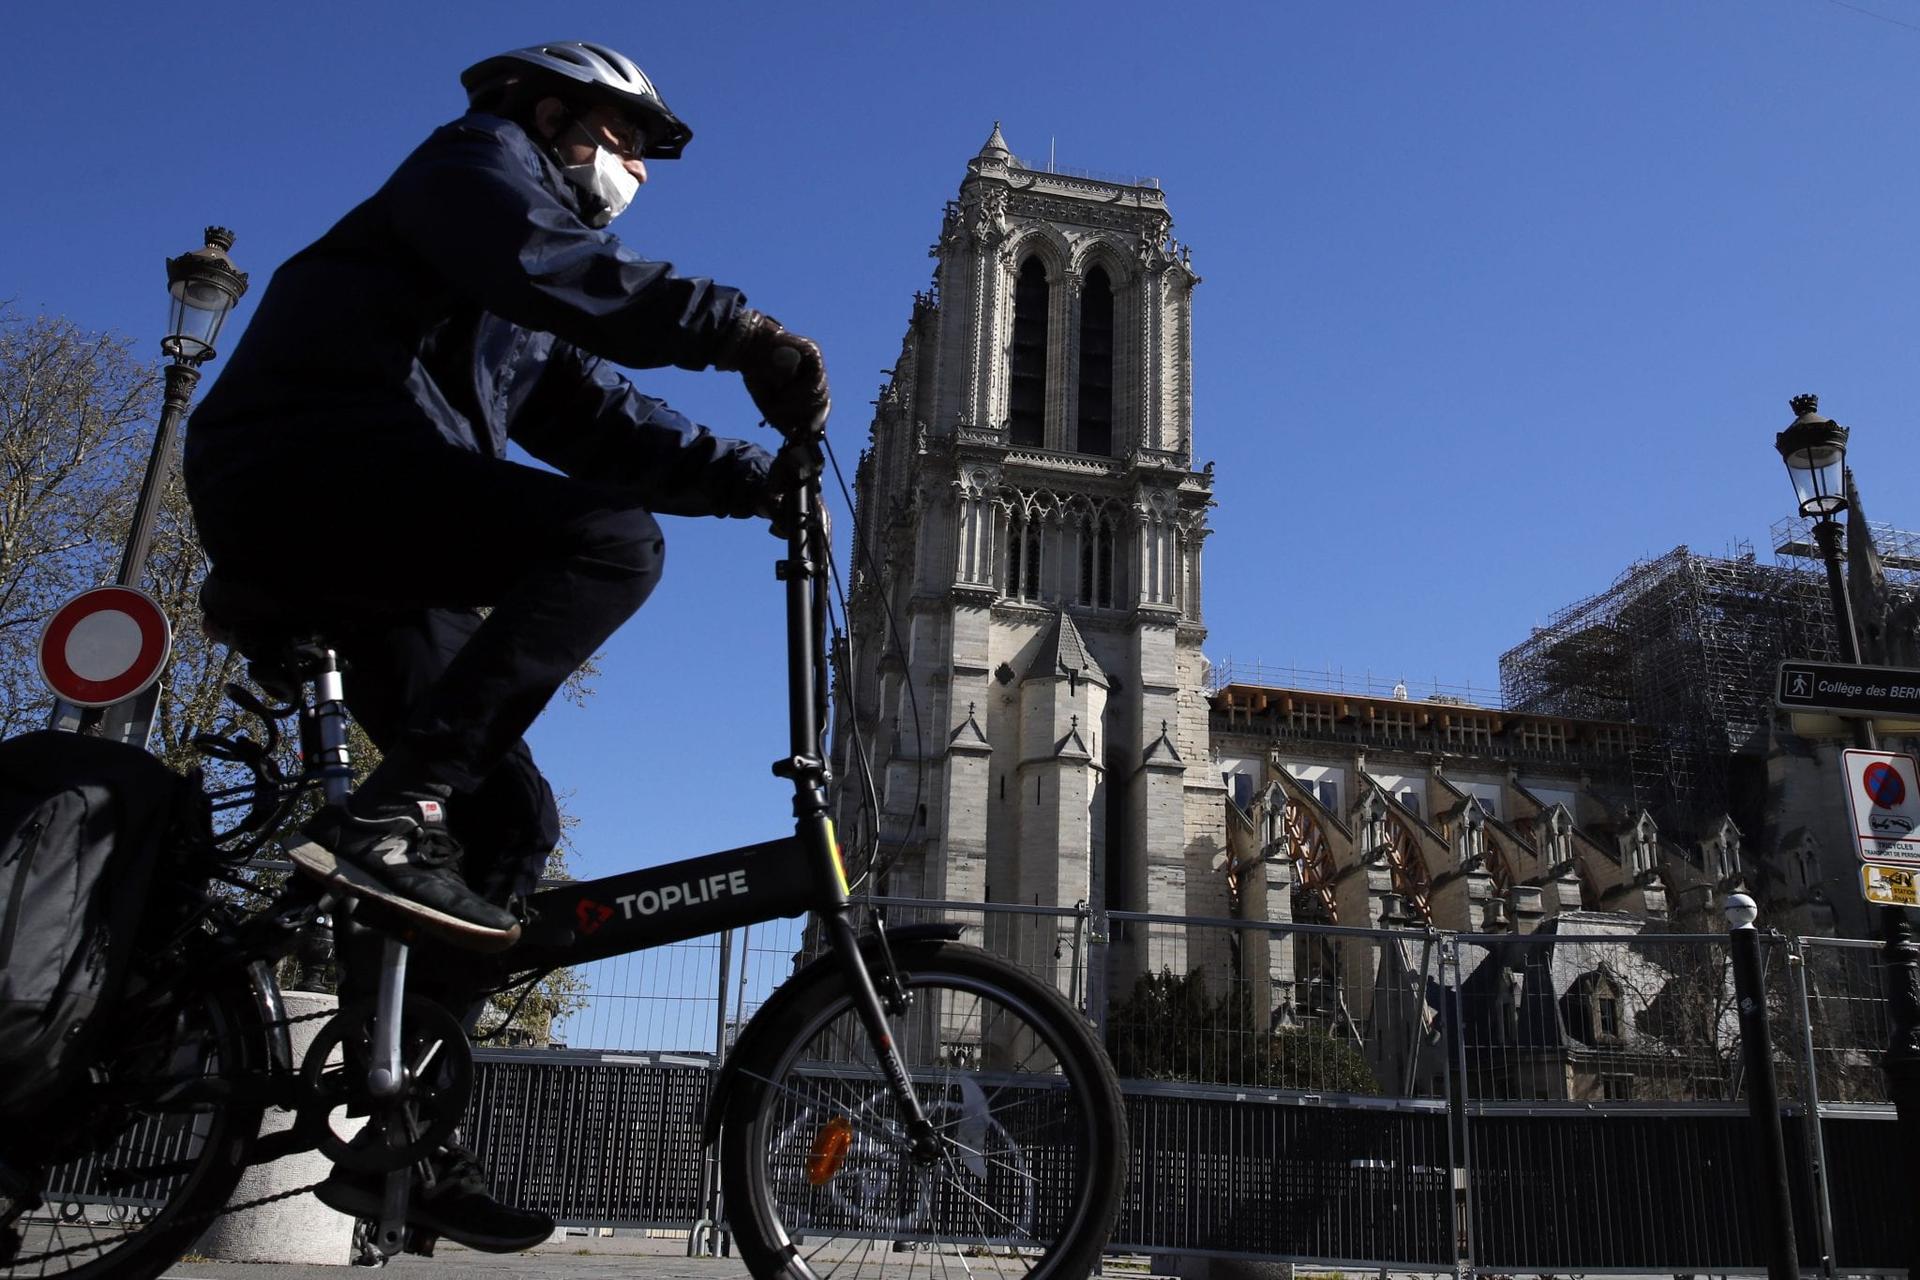 Still scarred, Notre Dame lives anew in coronavirus crisis